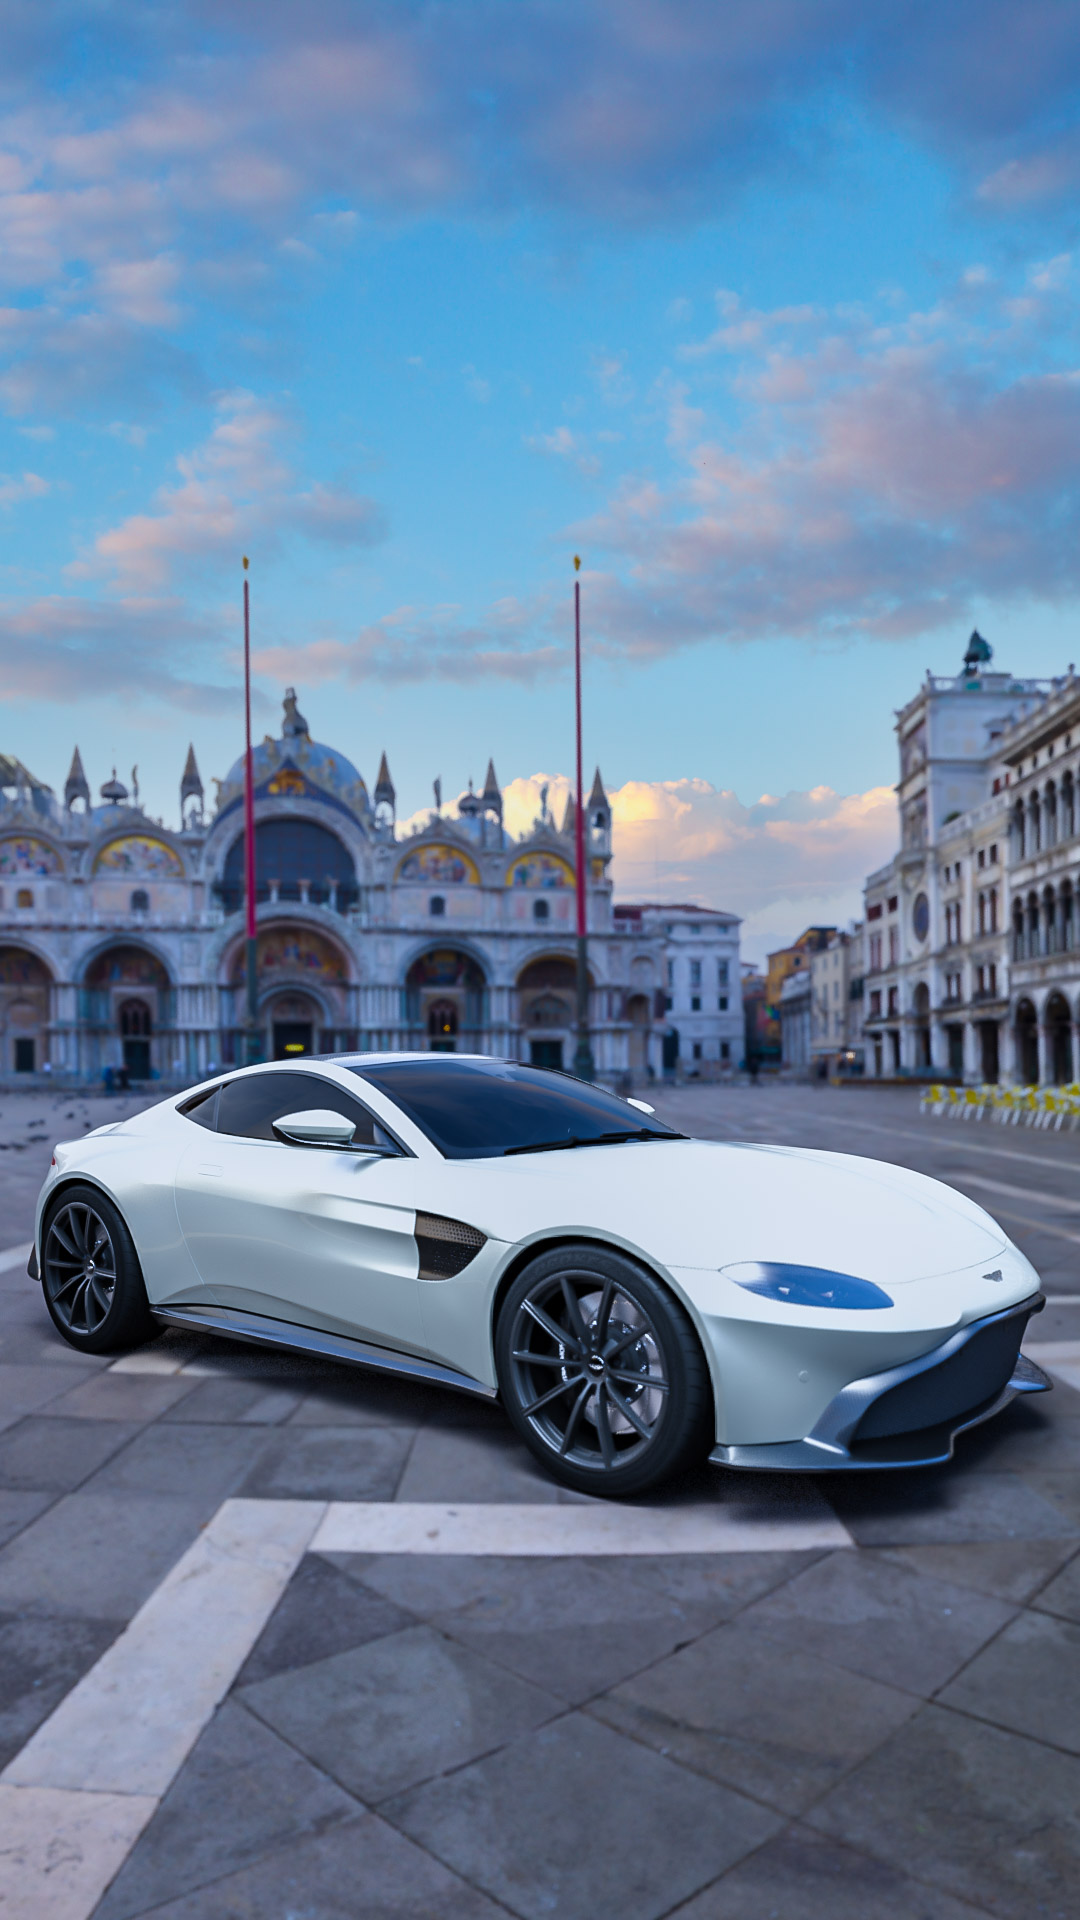 Indulge in the luxury of the Aston Martin Vantage with our car wallpaper for android, a symbol of British performance and style.